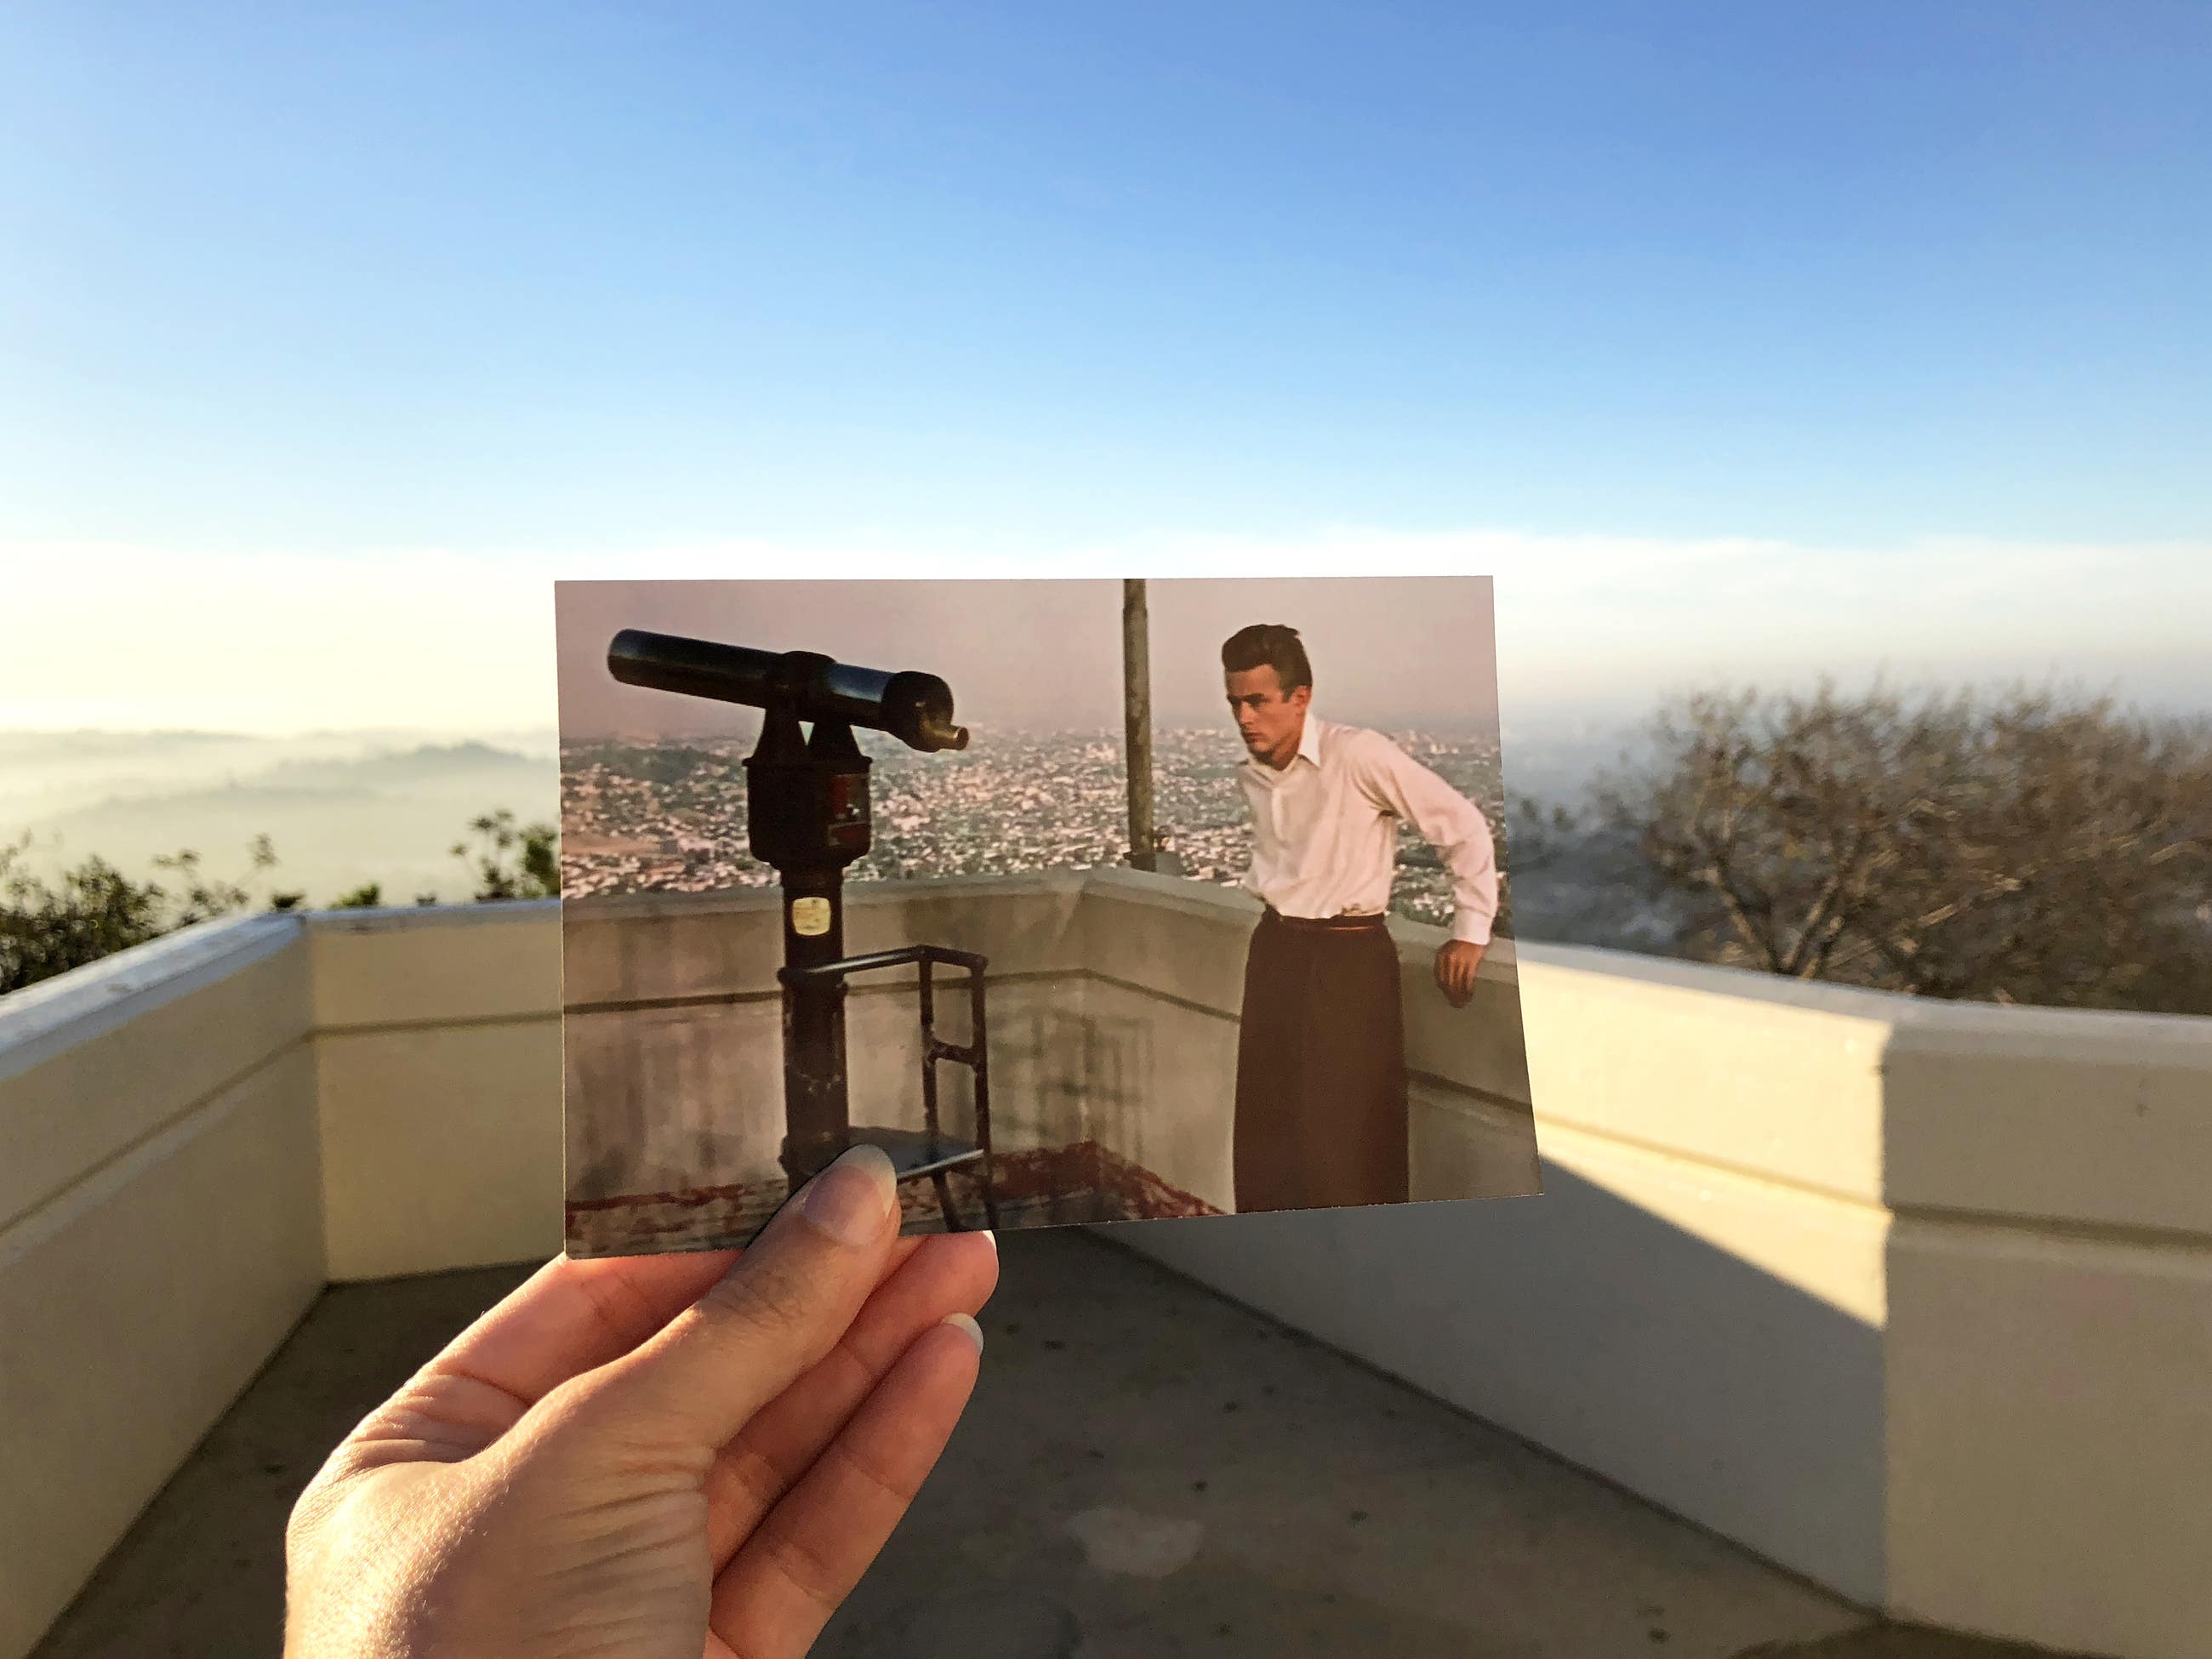 James Dean at the Griffith Observatory in "Rebel Without a Cause"